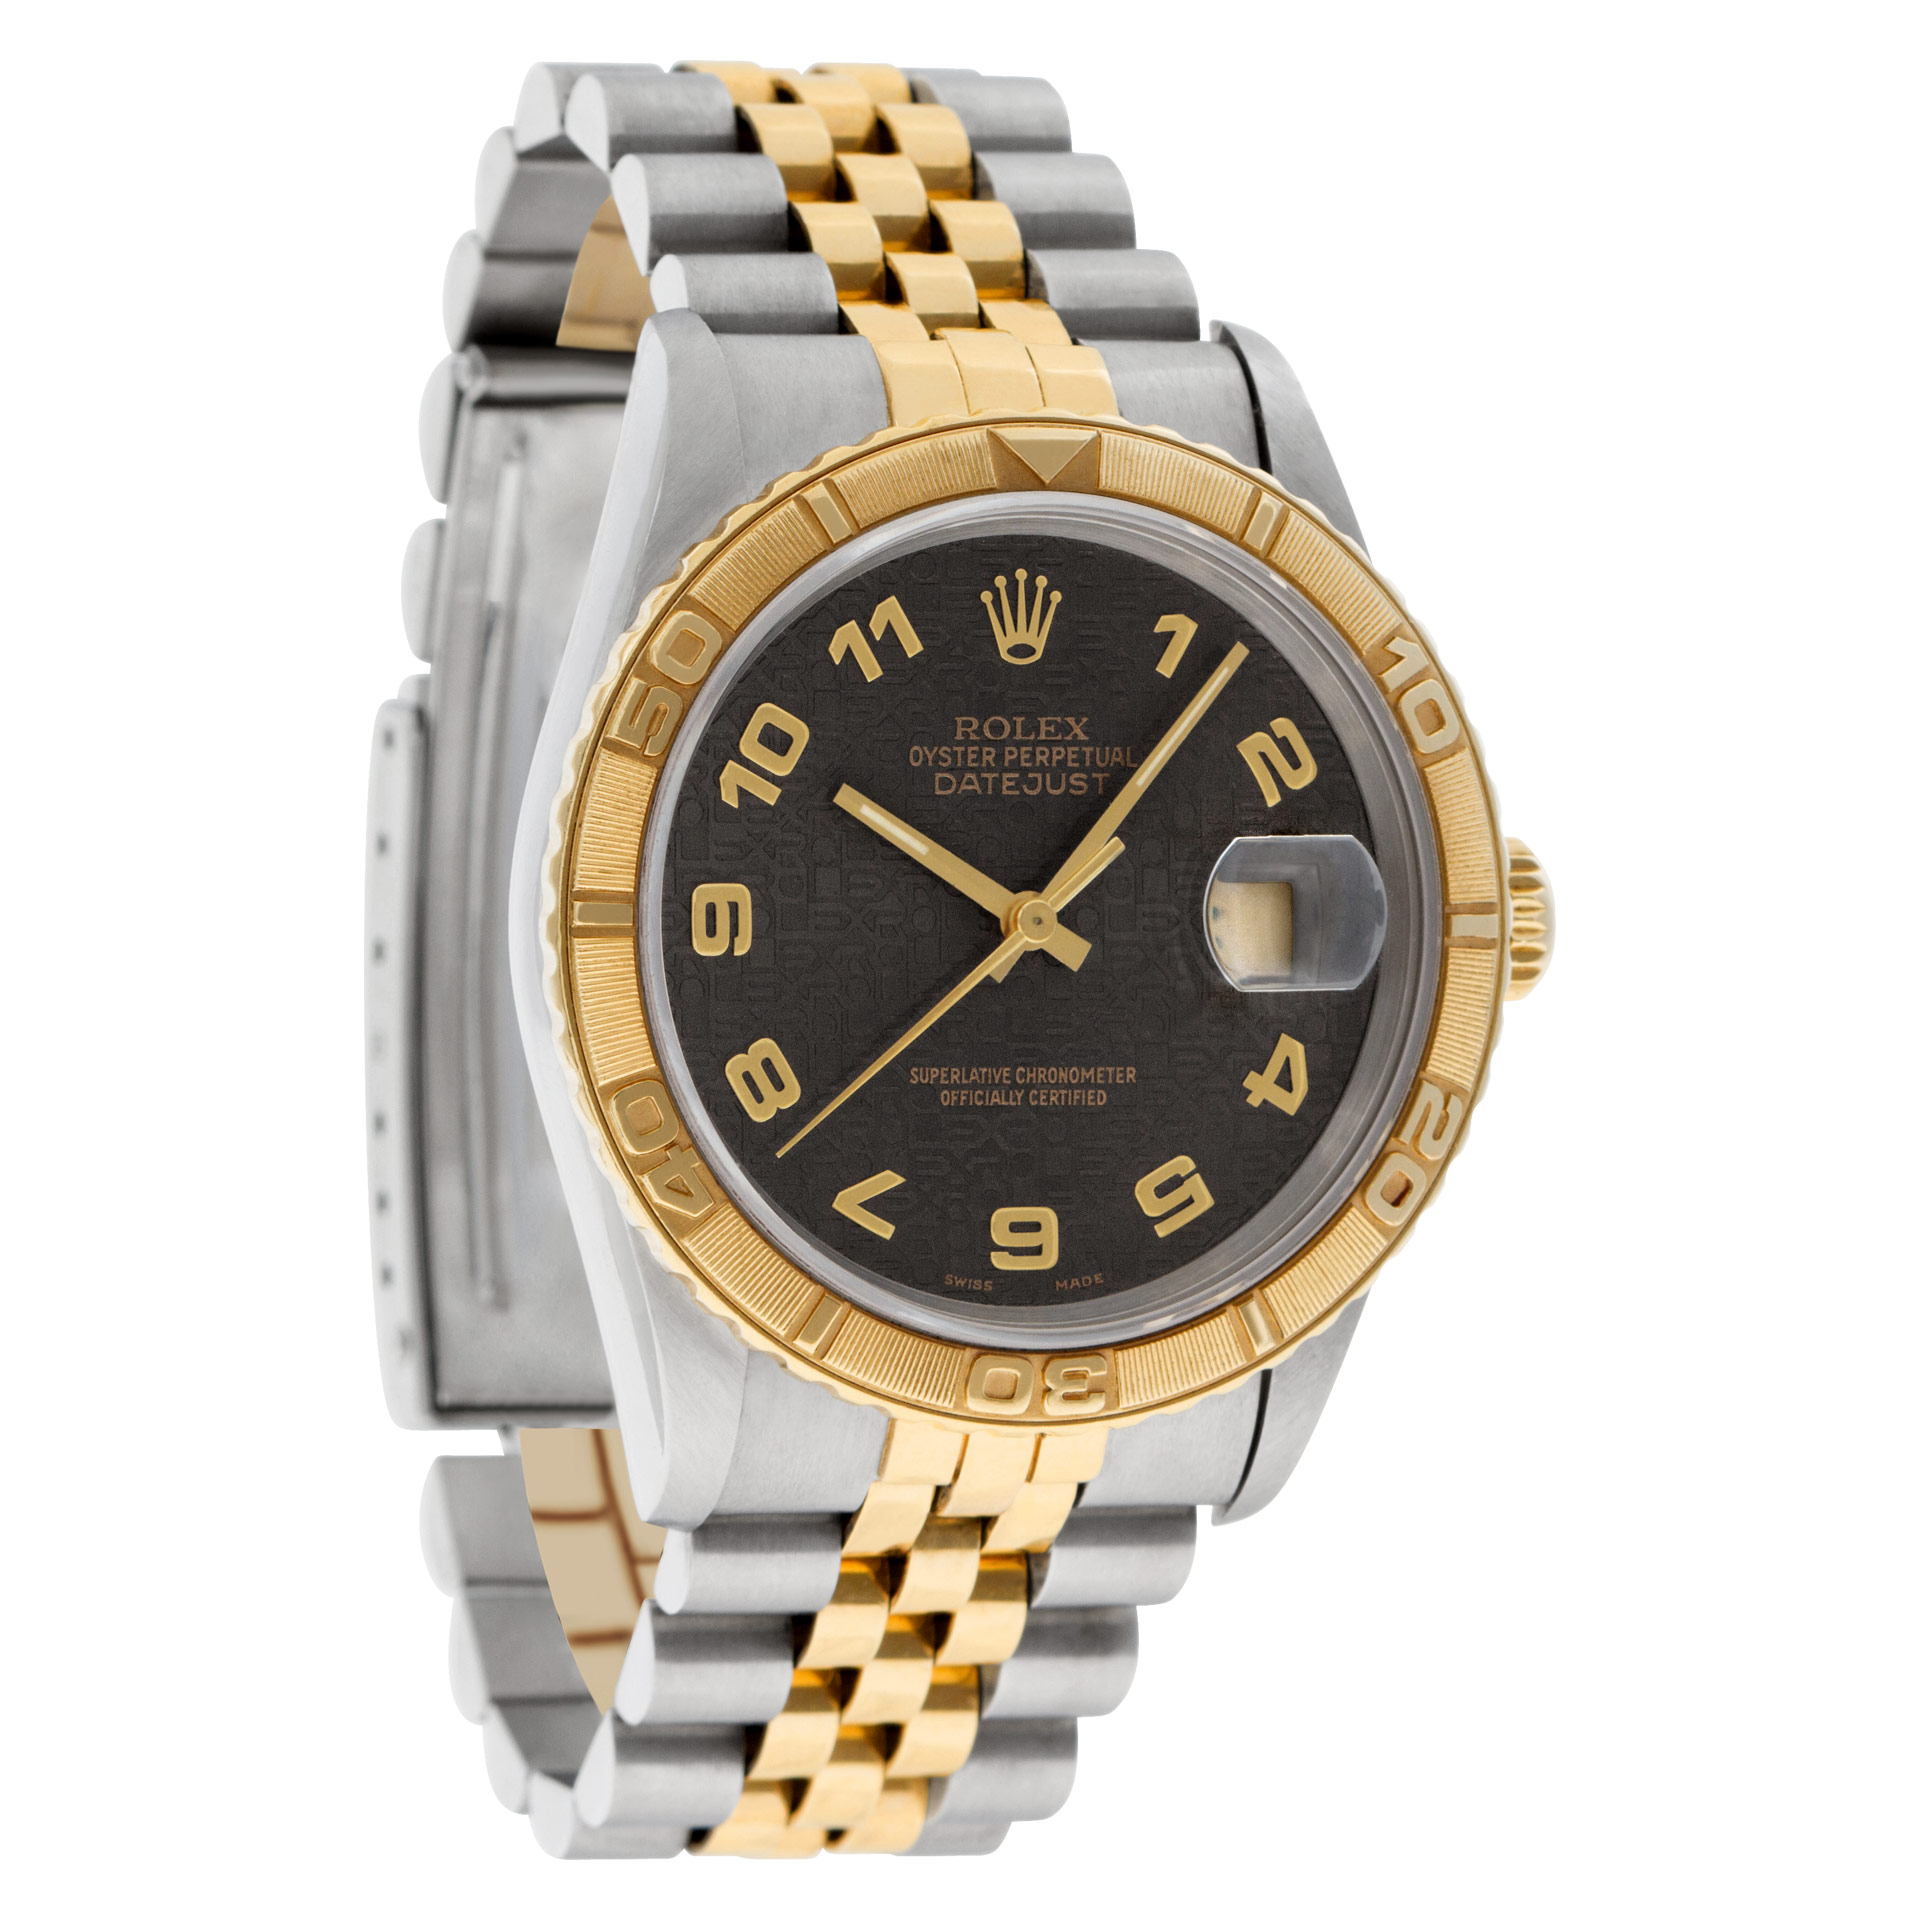 Preowned Rolex Datejust 16263 18k and 